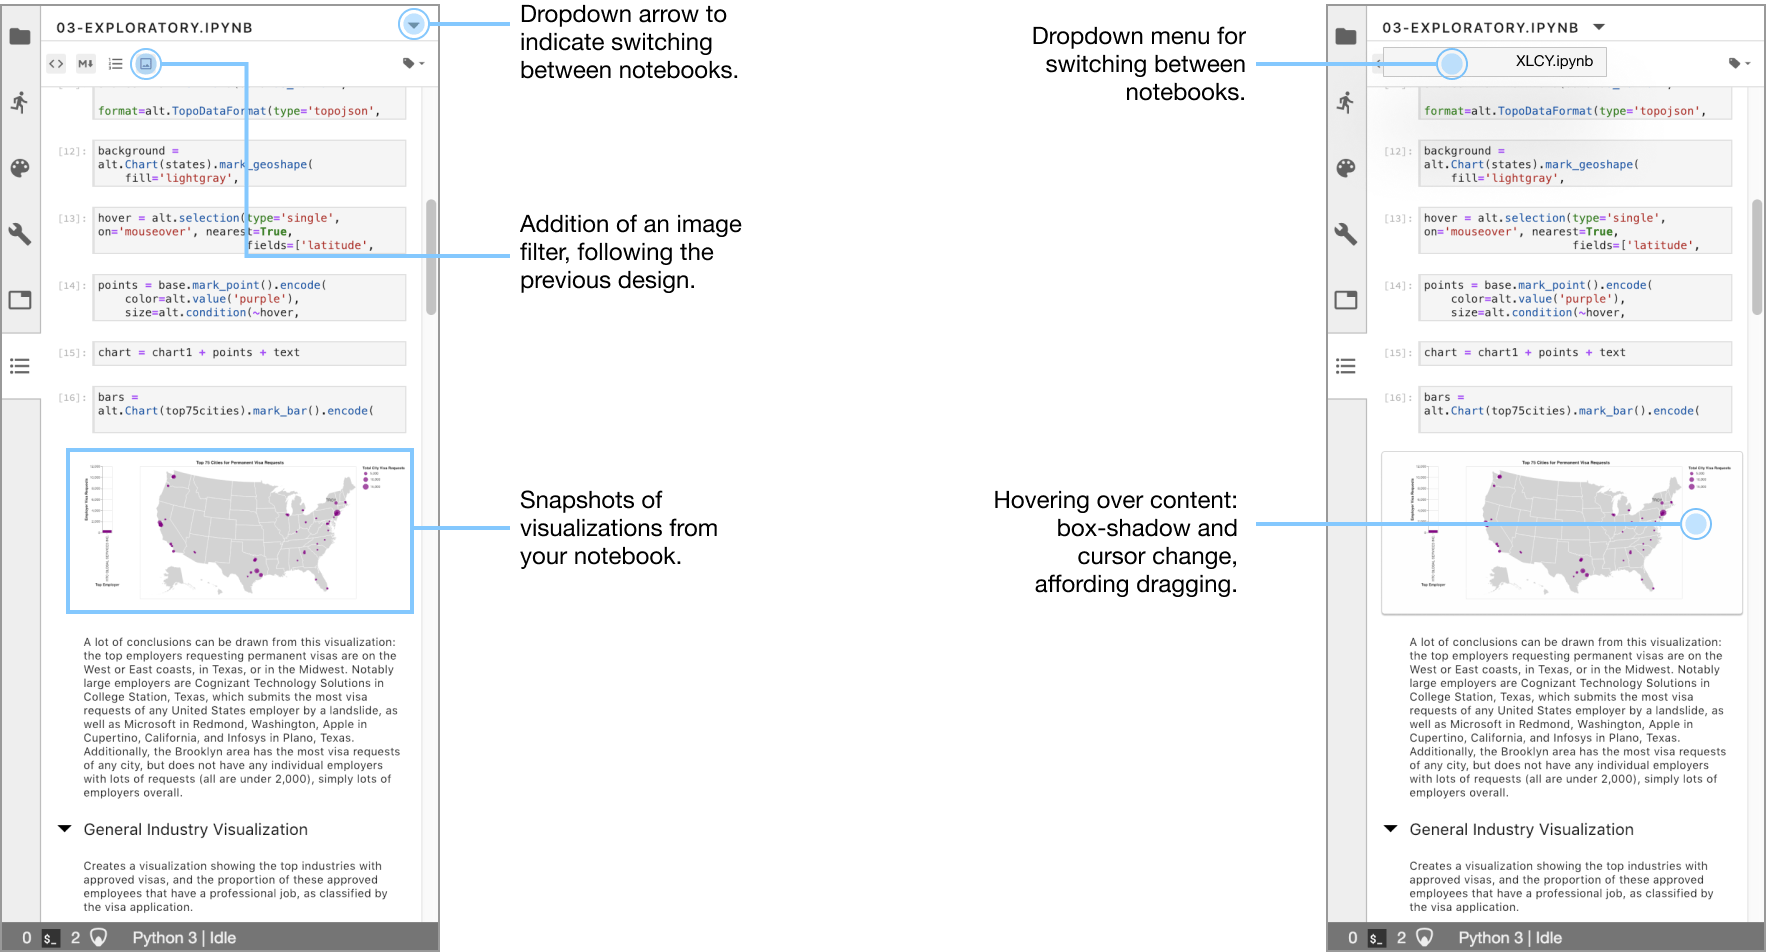 Diagram outlining the design changes made to Table of Contents. This includes additions of images in your Table of Contents, a dropdown menu for switching between notebooks, and hover states.